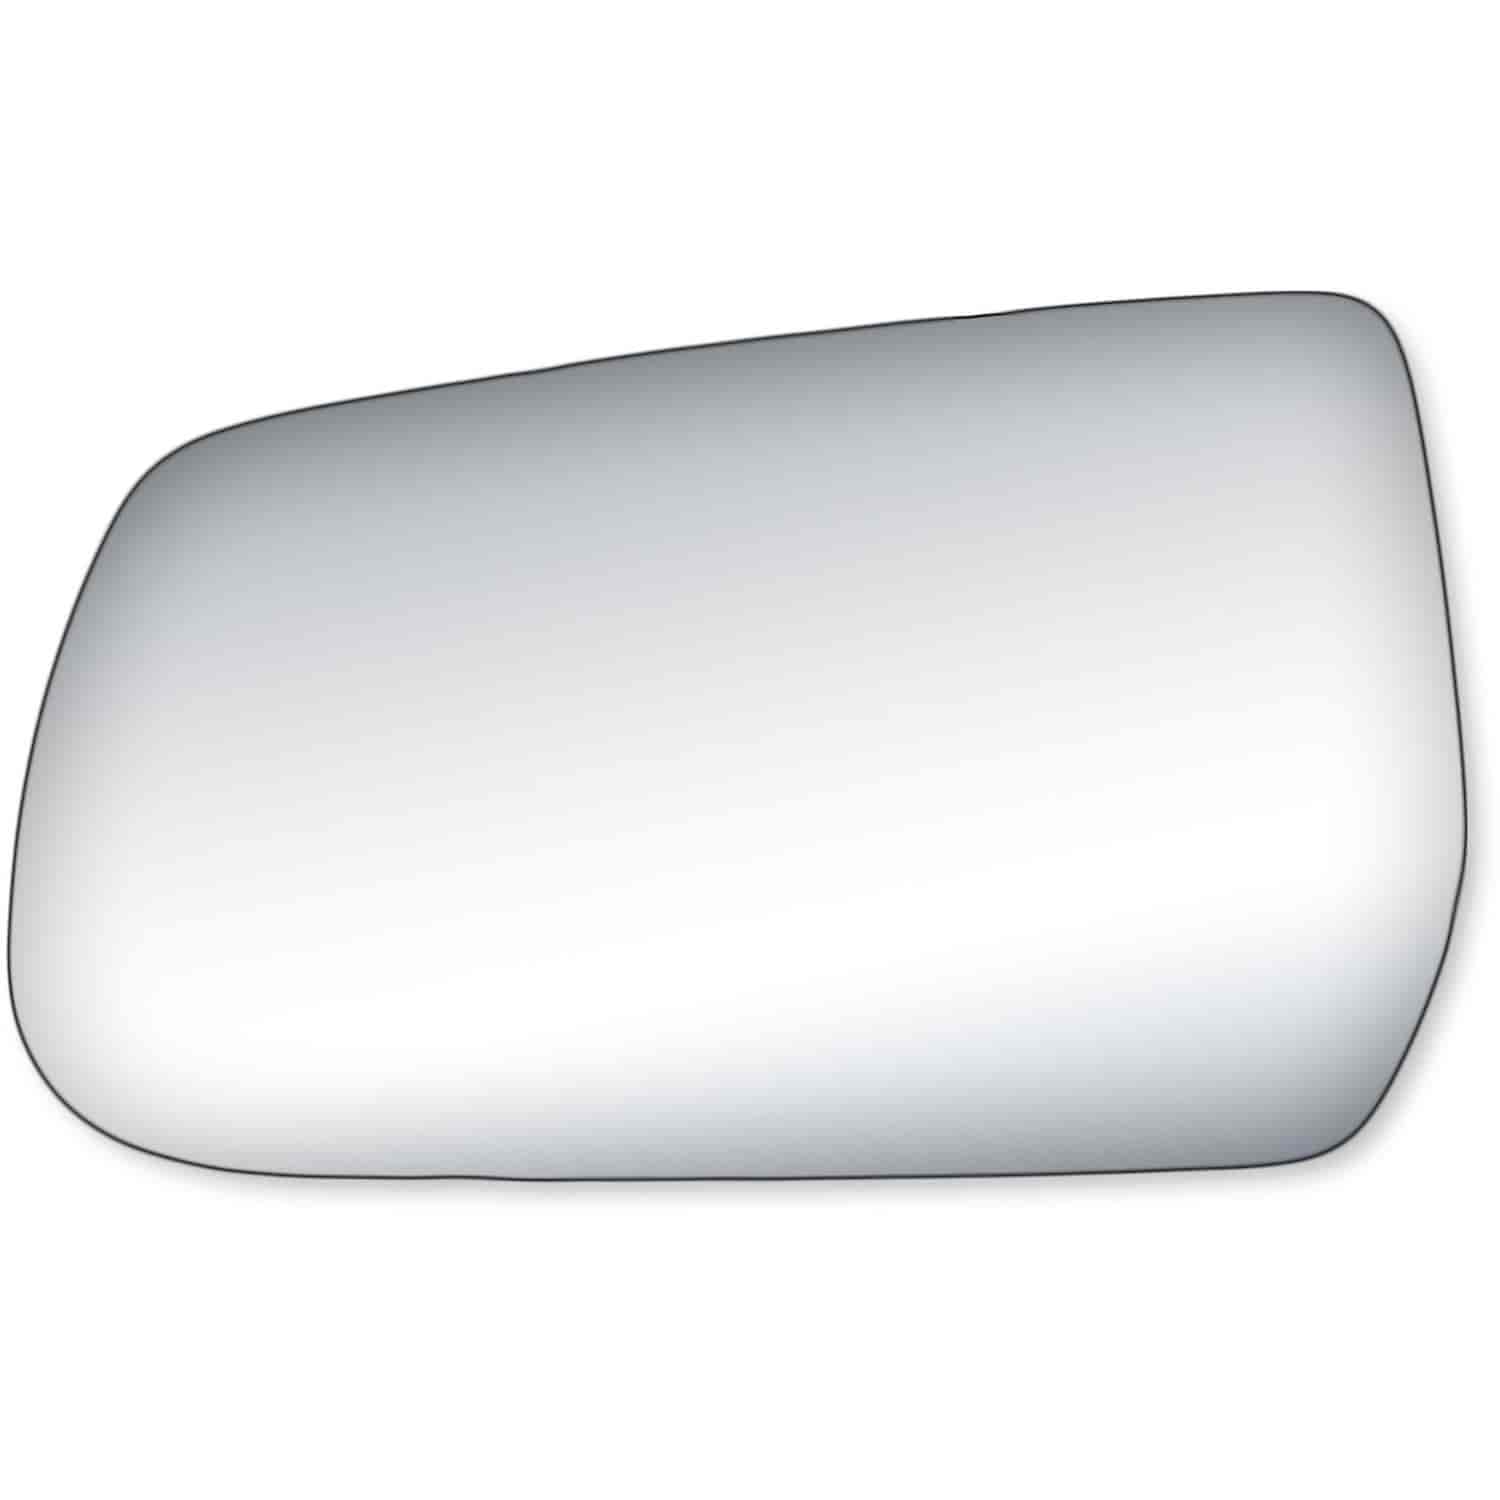 Replacement Glass for 10-14 Equinox w/out blind spot lens ; 10-14 Terrain w/out blind spot lens the